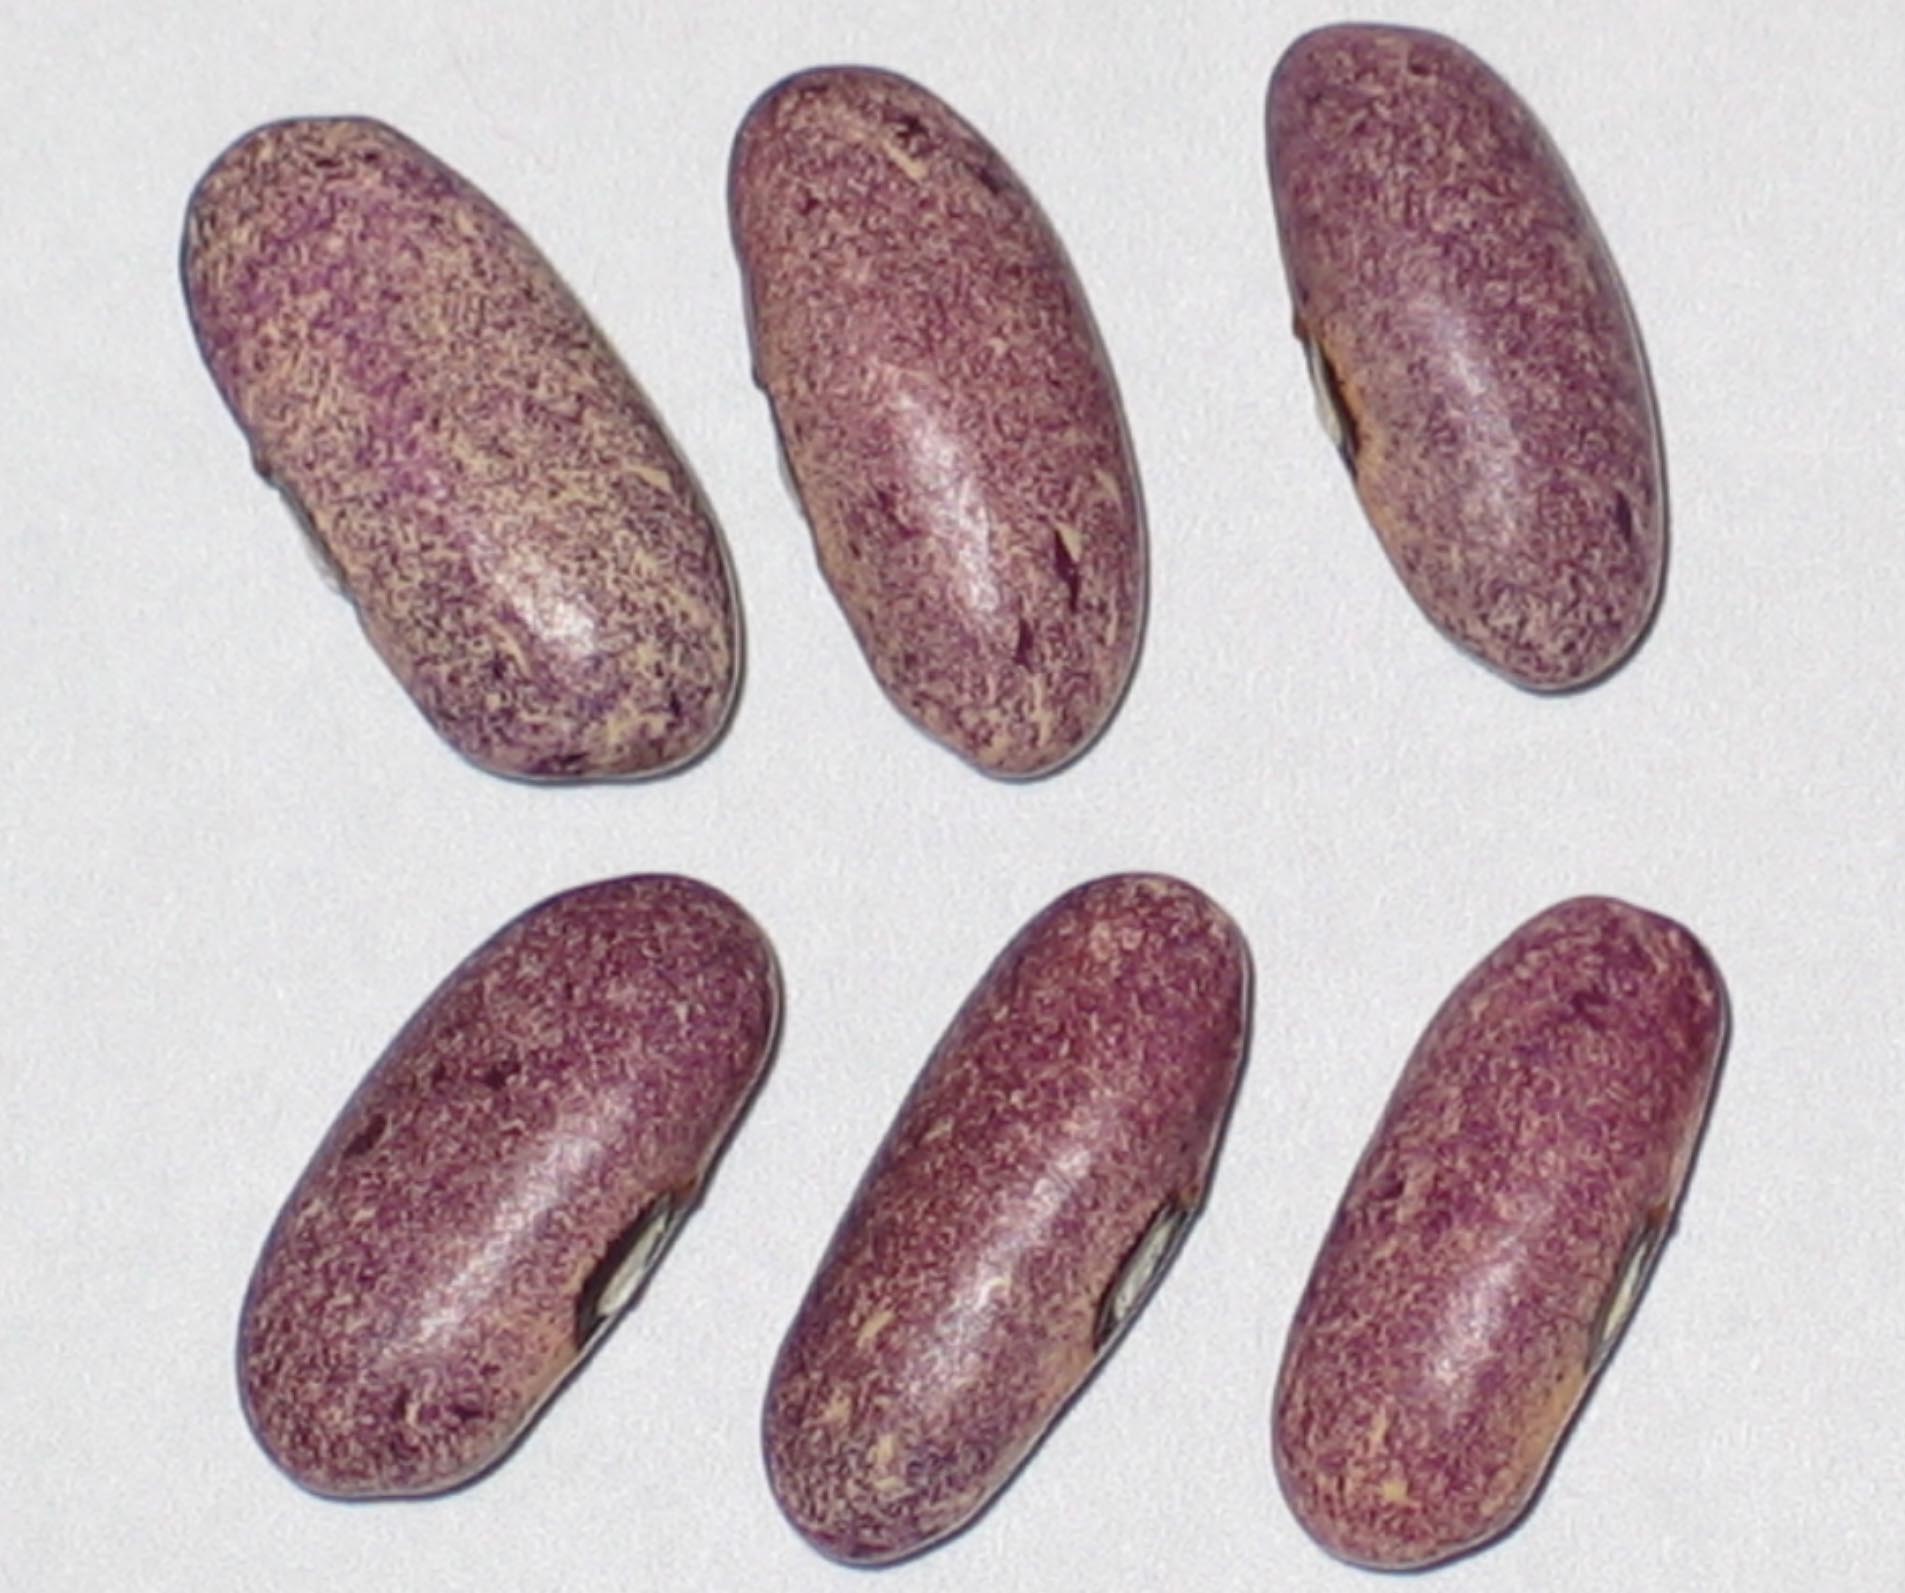 image of Mrociumere beans